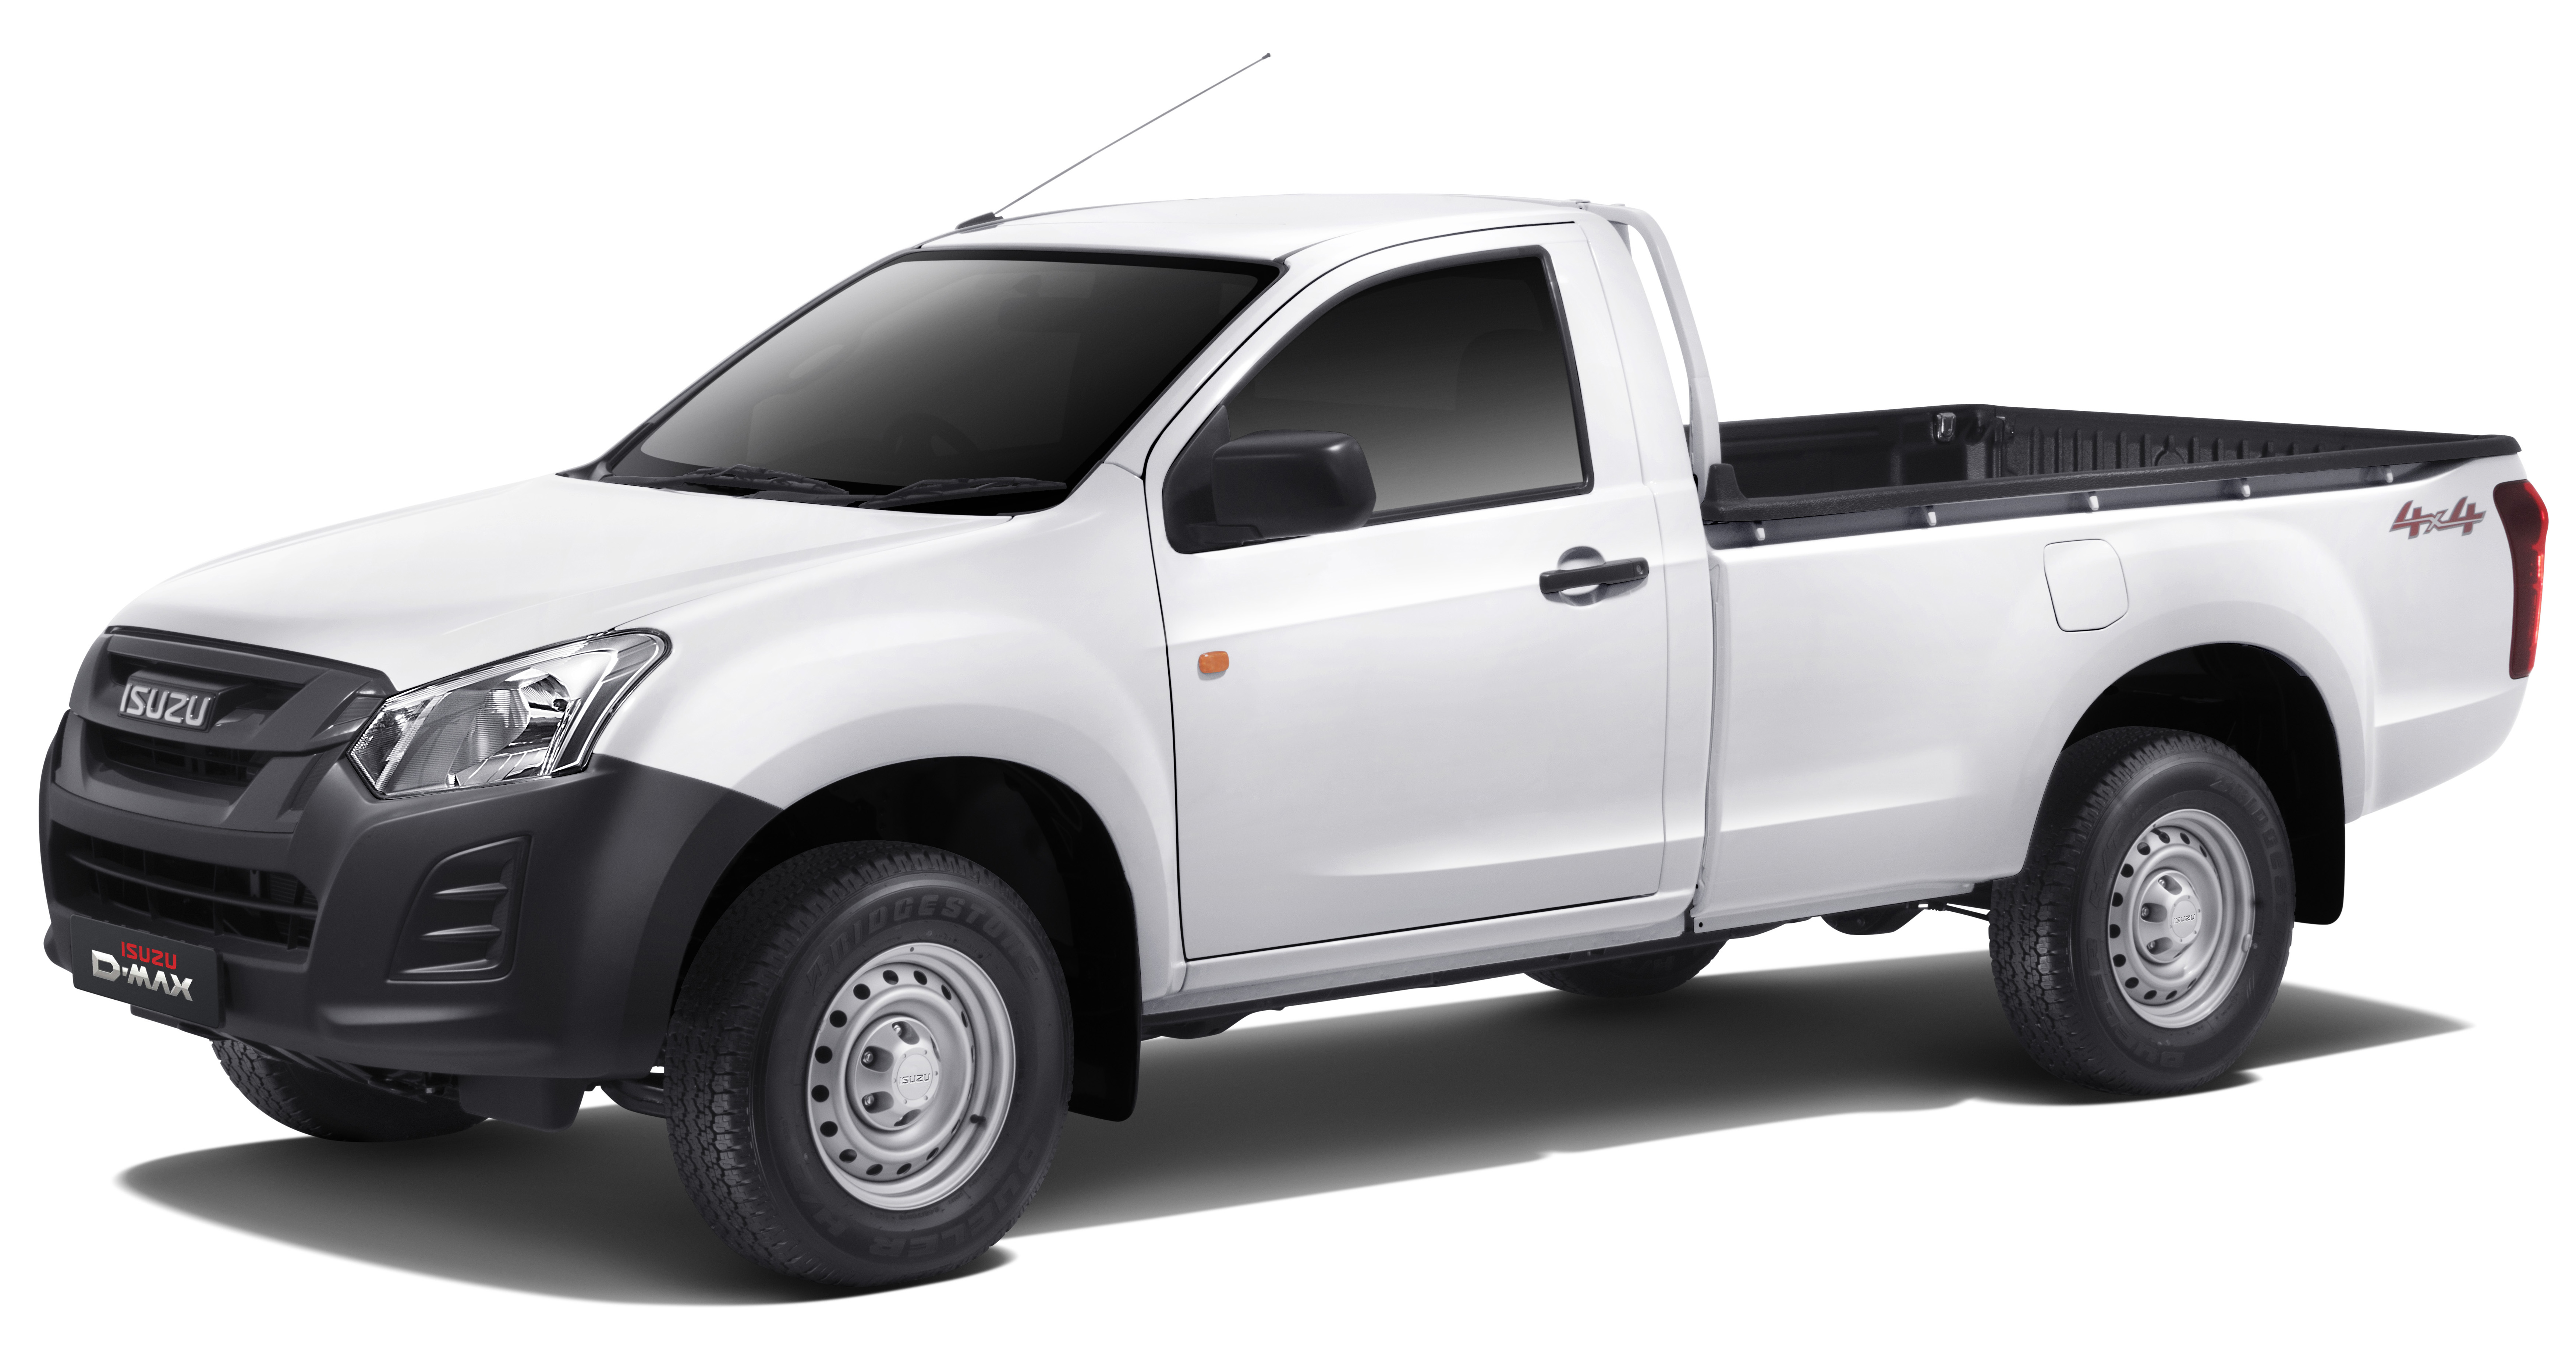 Isuzu DMax 3.0L Single Cab launched in Malaysia  177 PS and 380 Nm